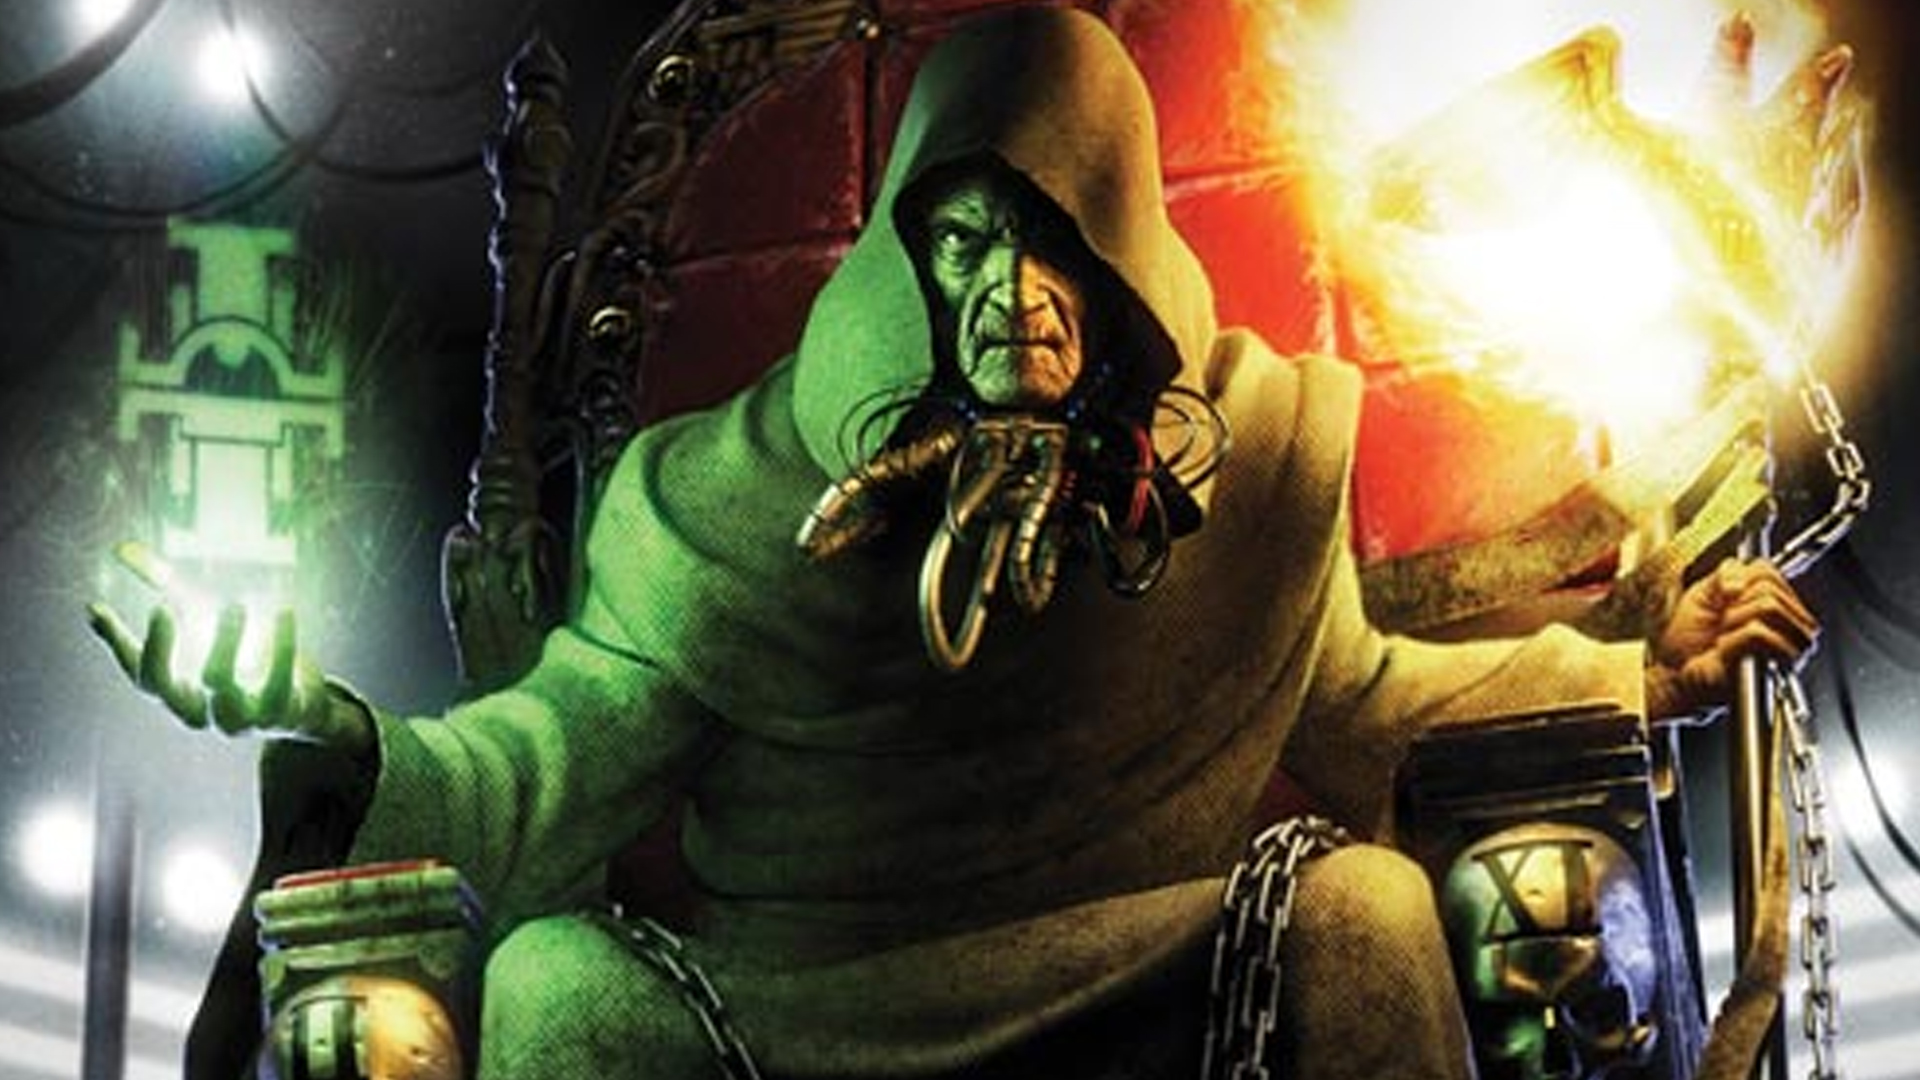 Warhammer 40k Malcador the Sigillite guide - Games Workshop artwork showing Malcador hooded, with a fiery staff, sat on a seat